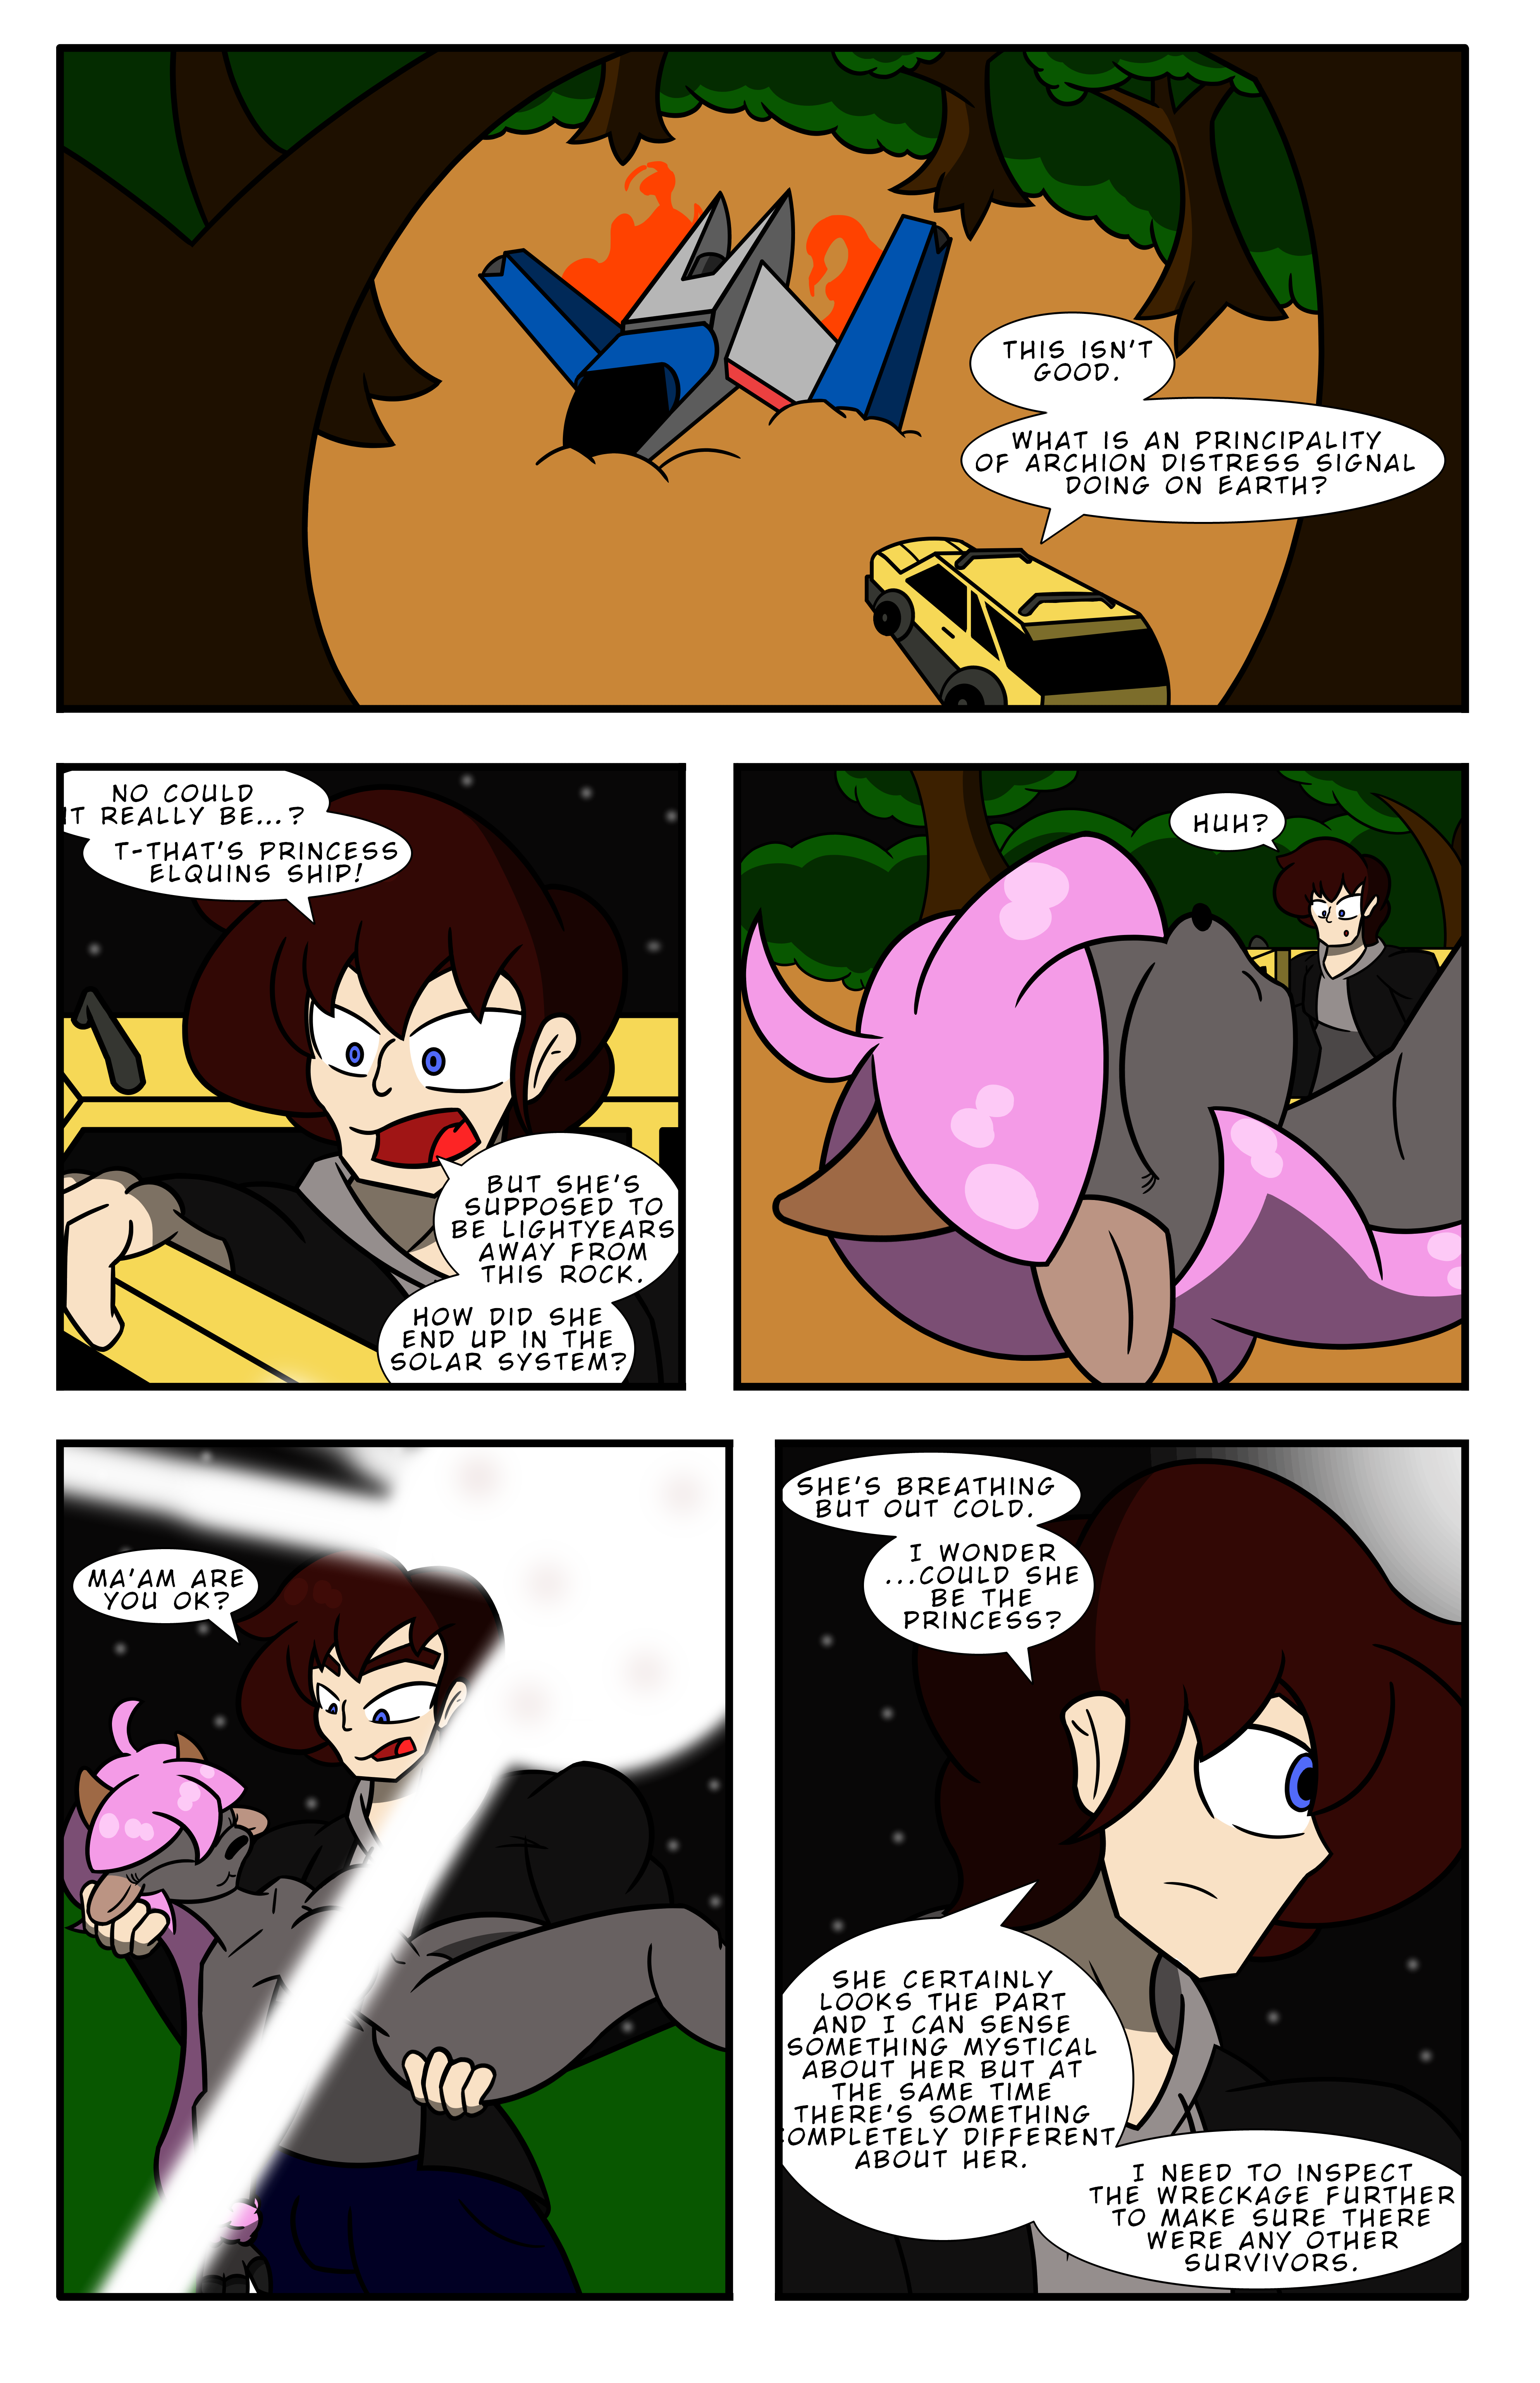 Metamorphosized Chapter One, Page Eight